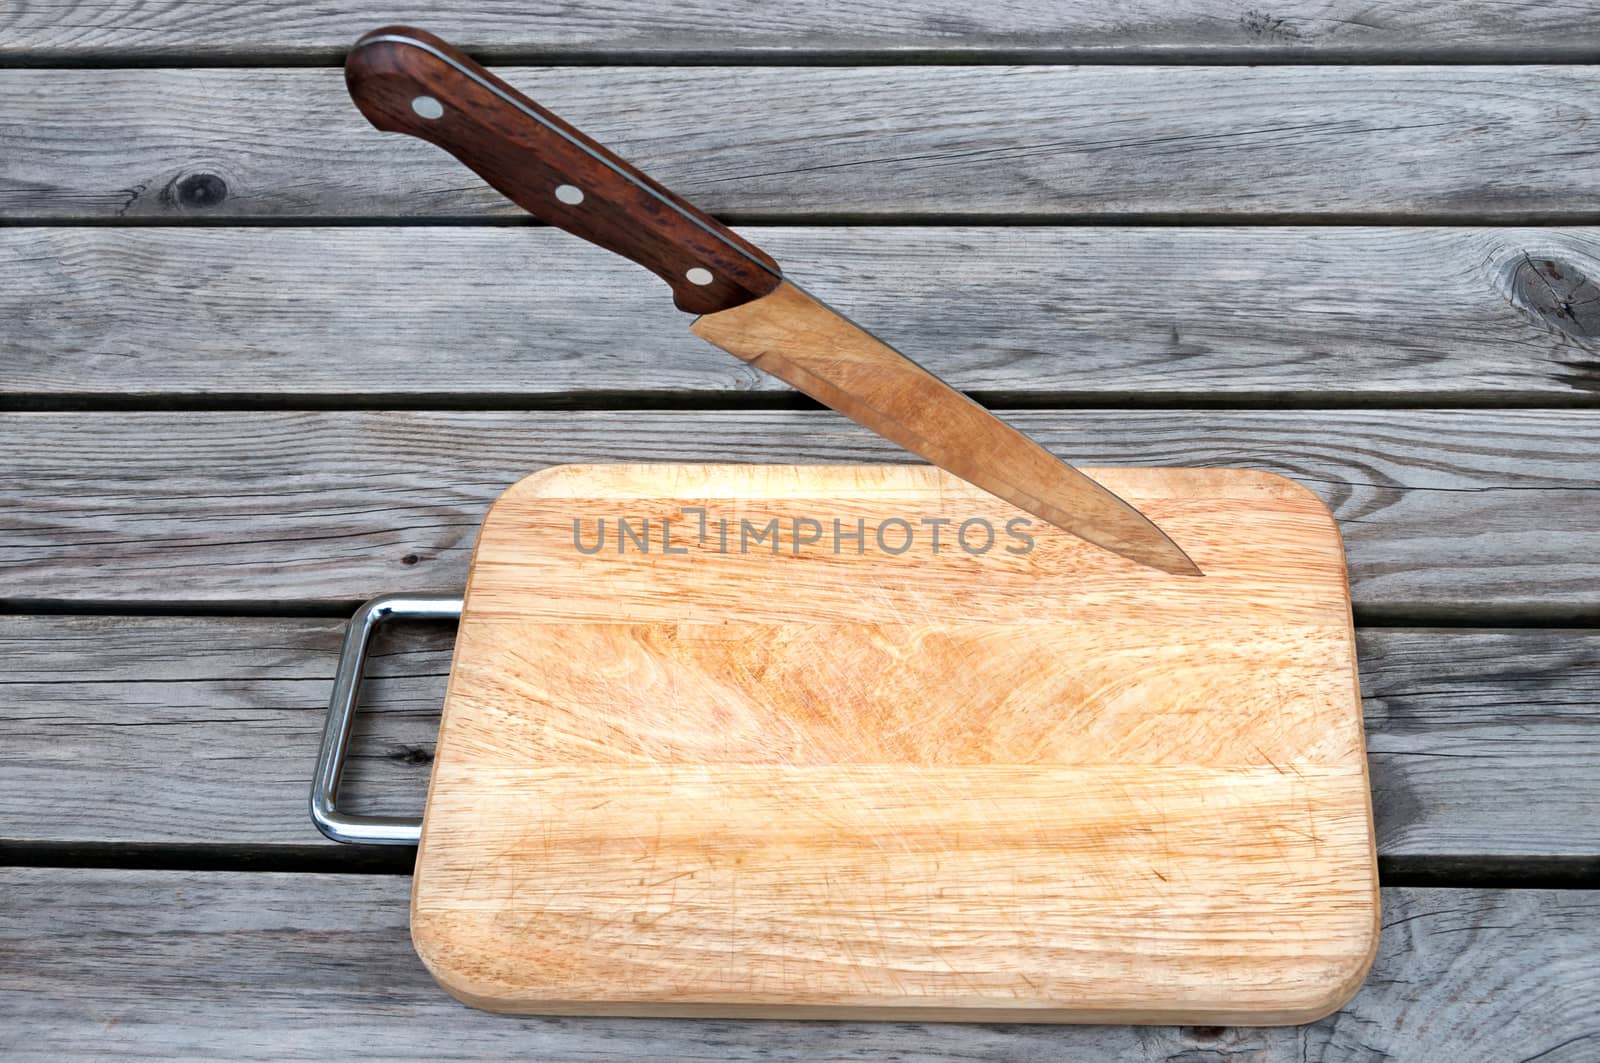 Steel knife and cutting board on a wooden table